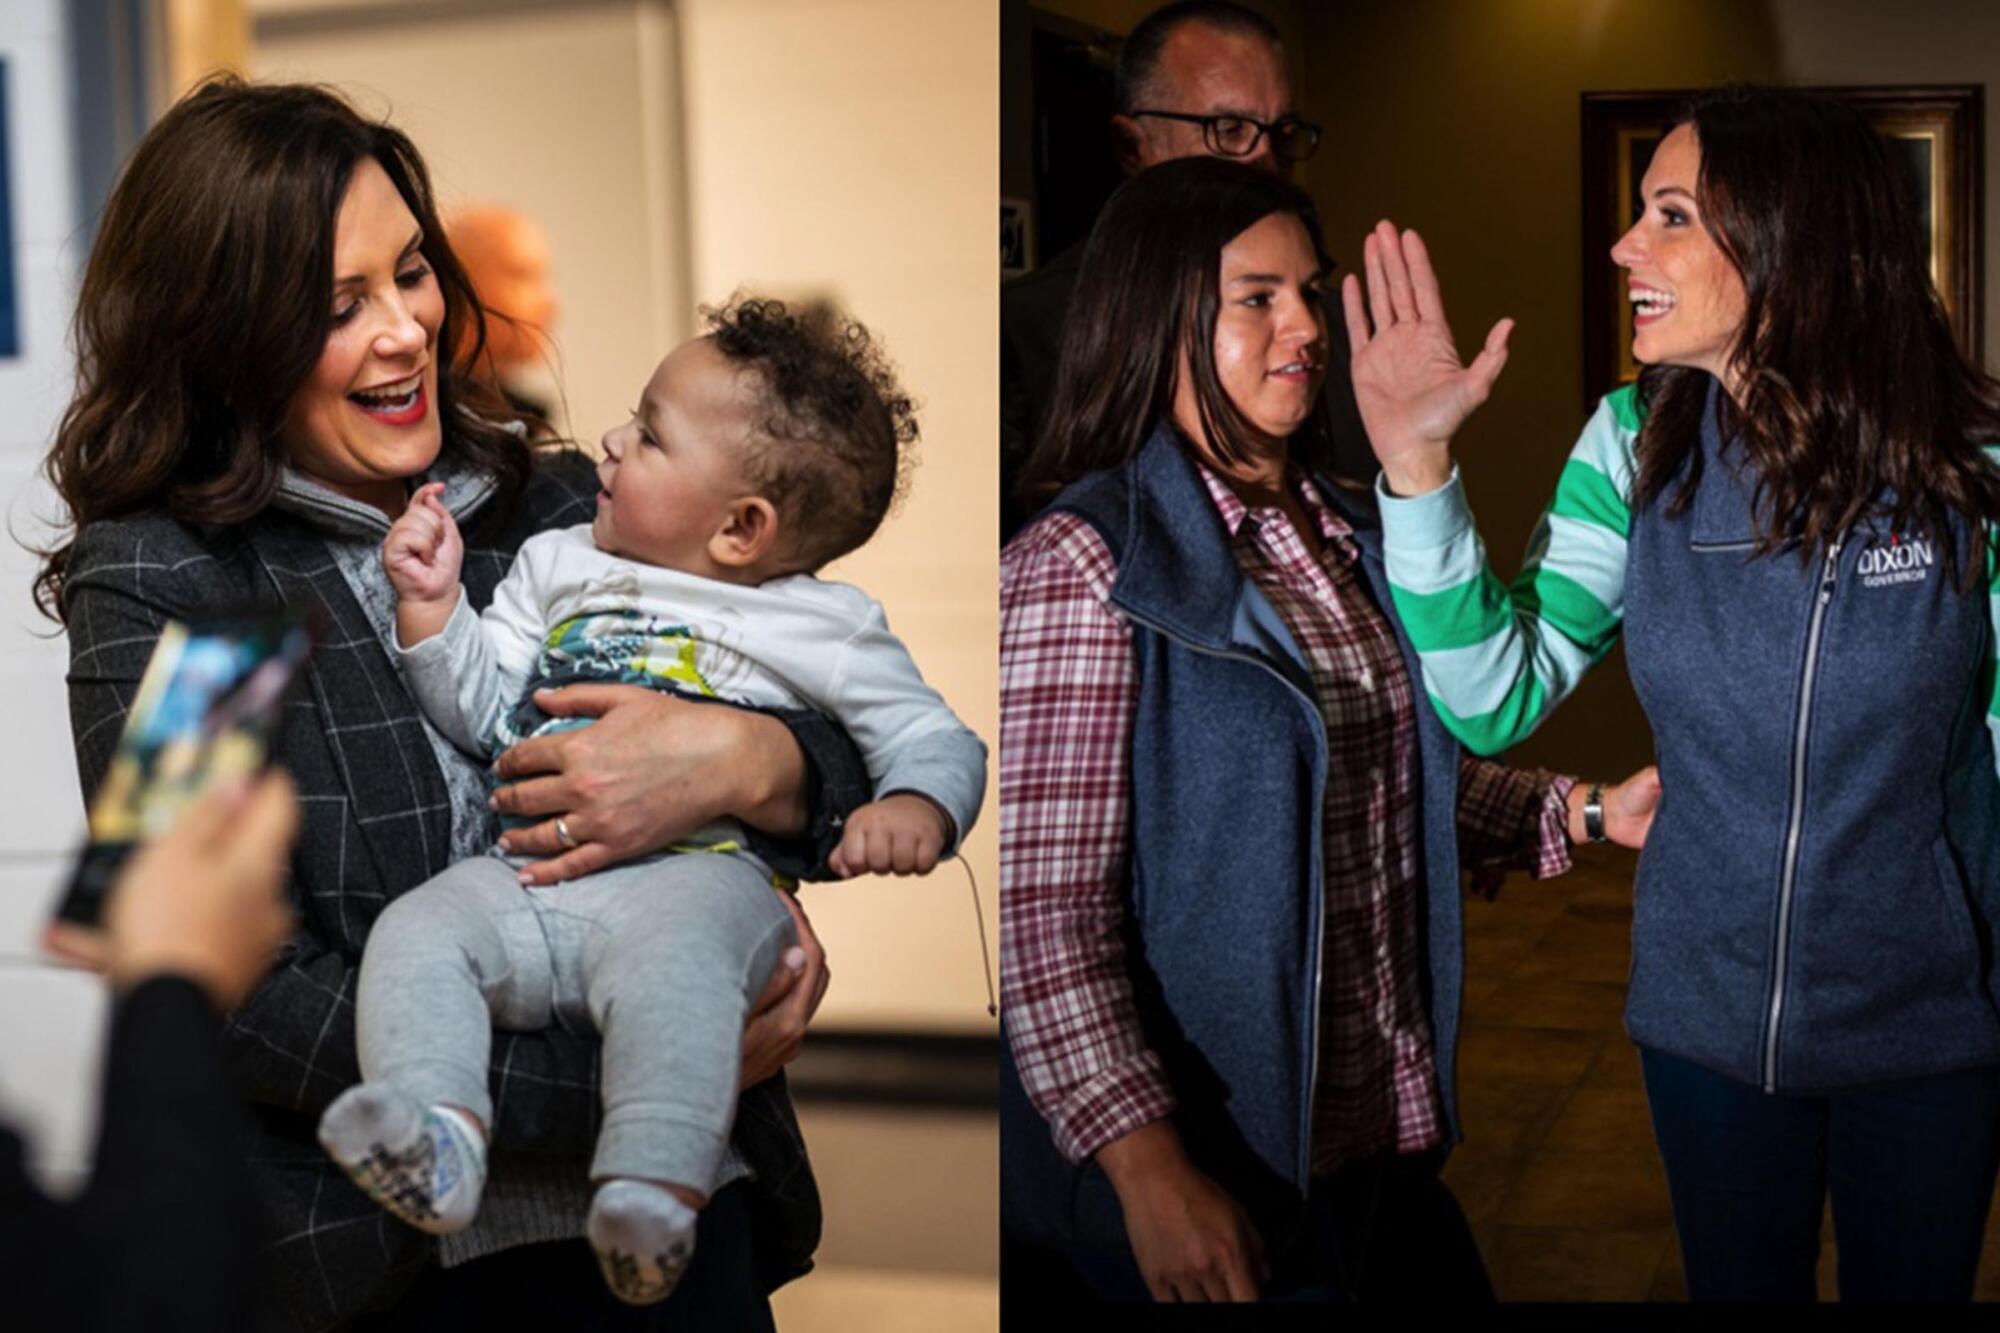 Side by side photos of a woman holding a baby, and a woman waving next to another woman.